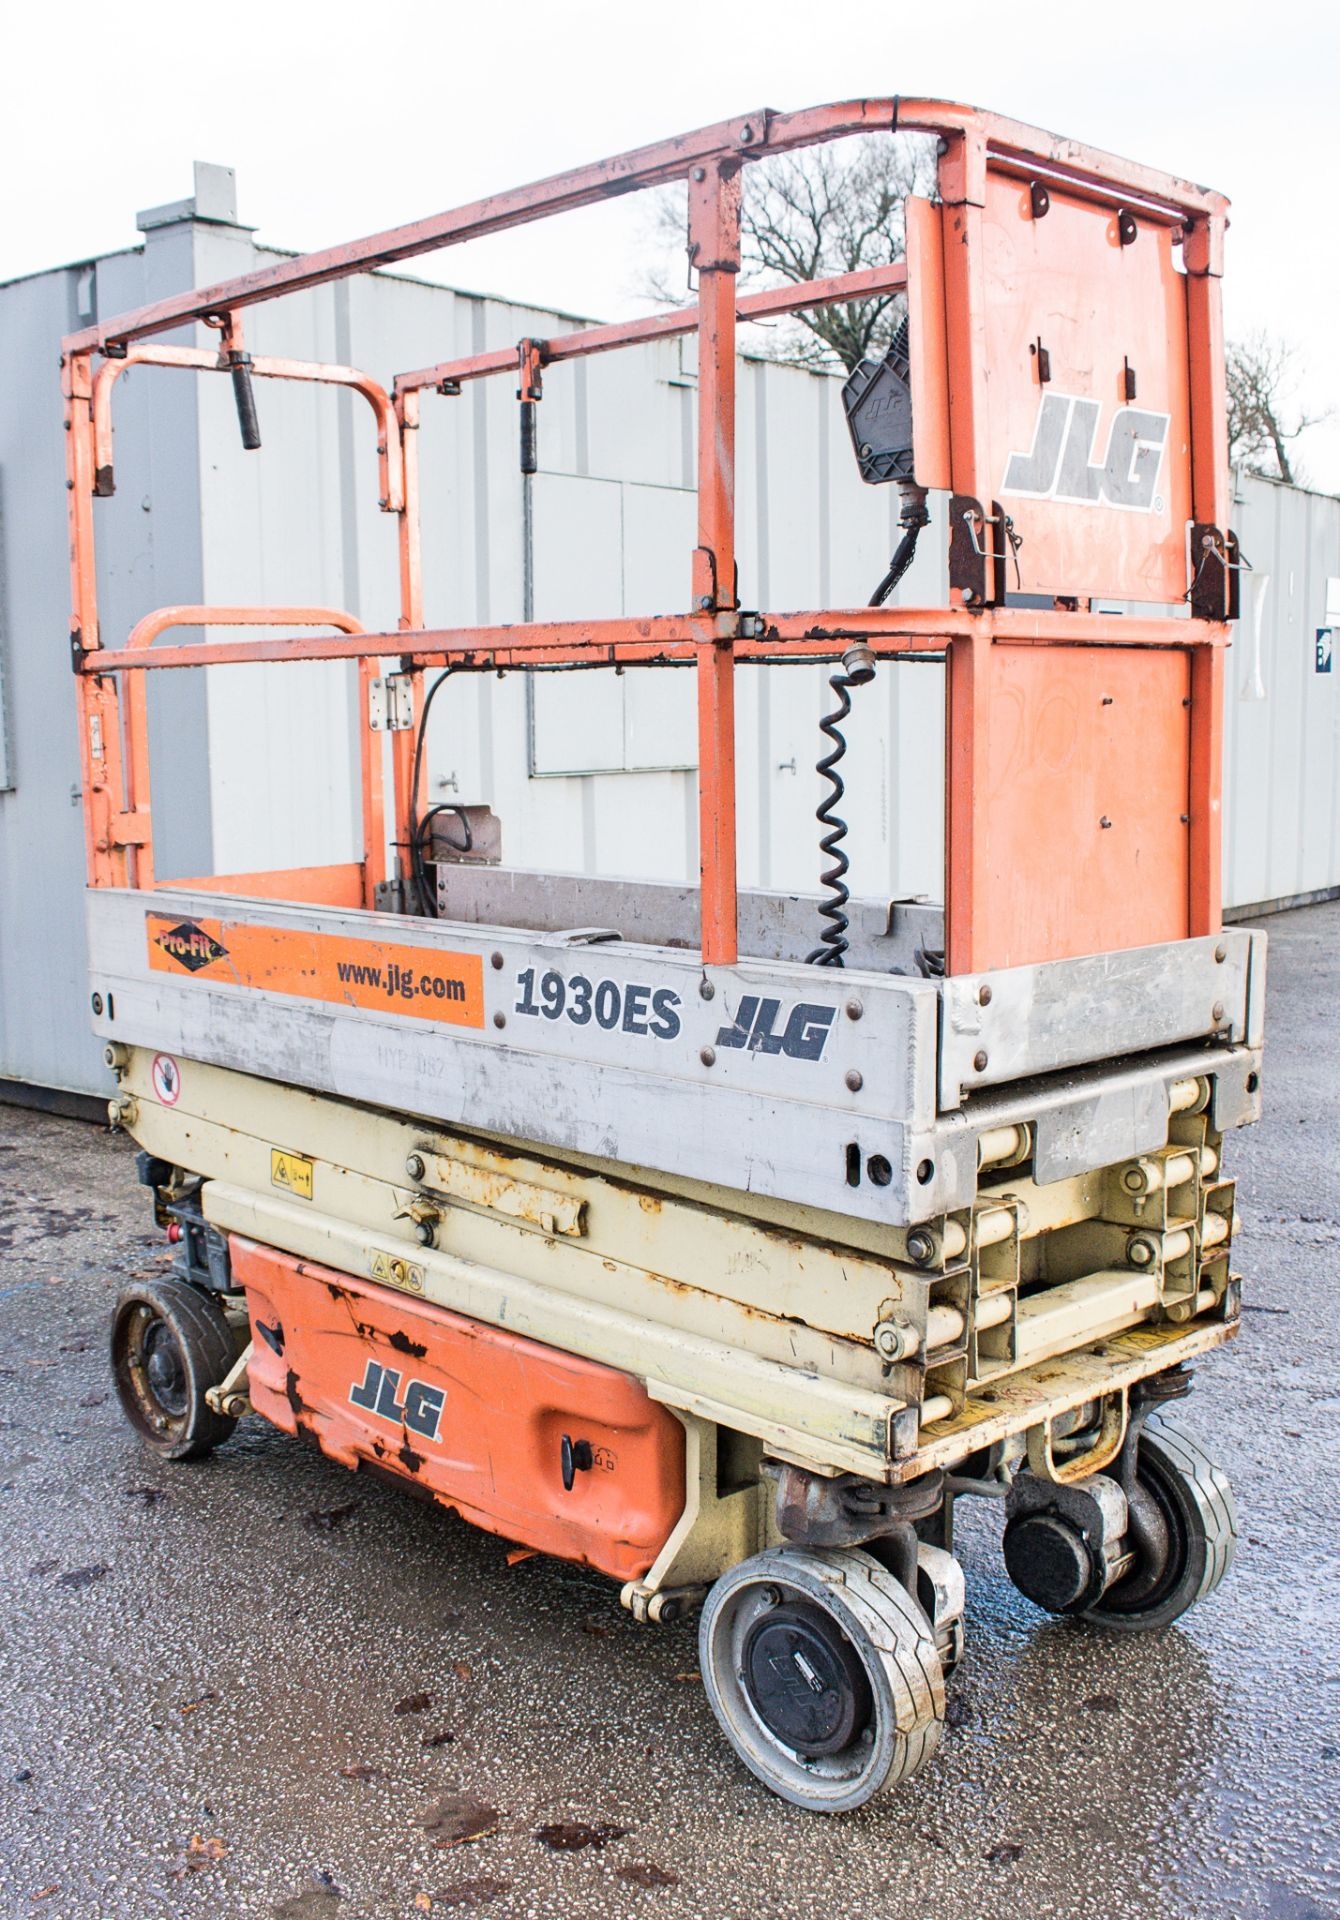 JLG 1930 ES battery electric scissor lift access platform Year: 2002 S/N: 16295 Recorded Hours: 333 - Image 2 of 6